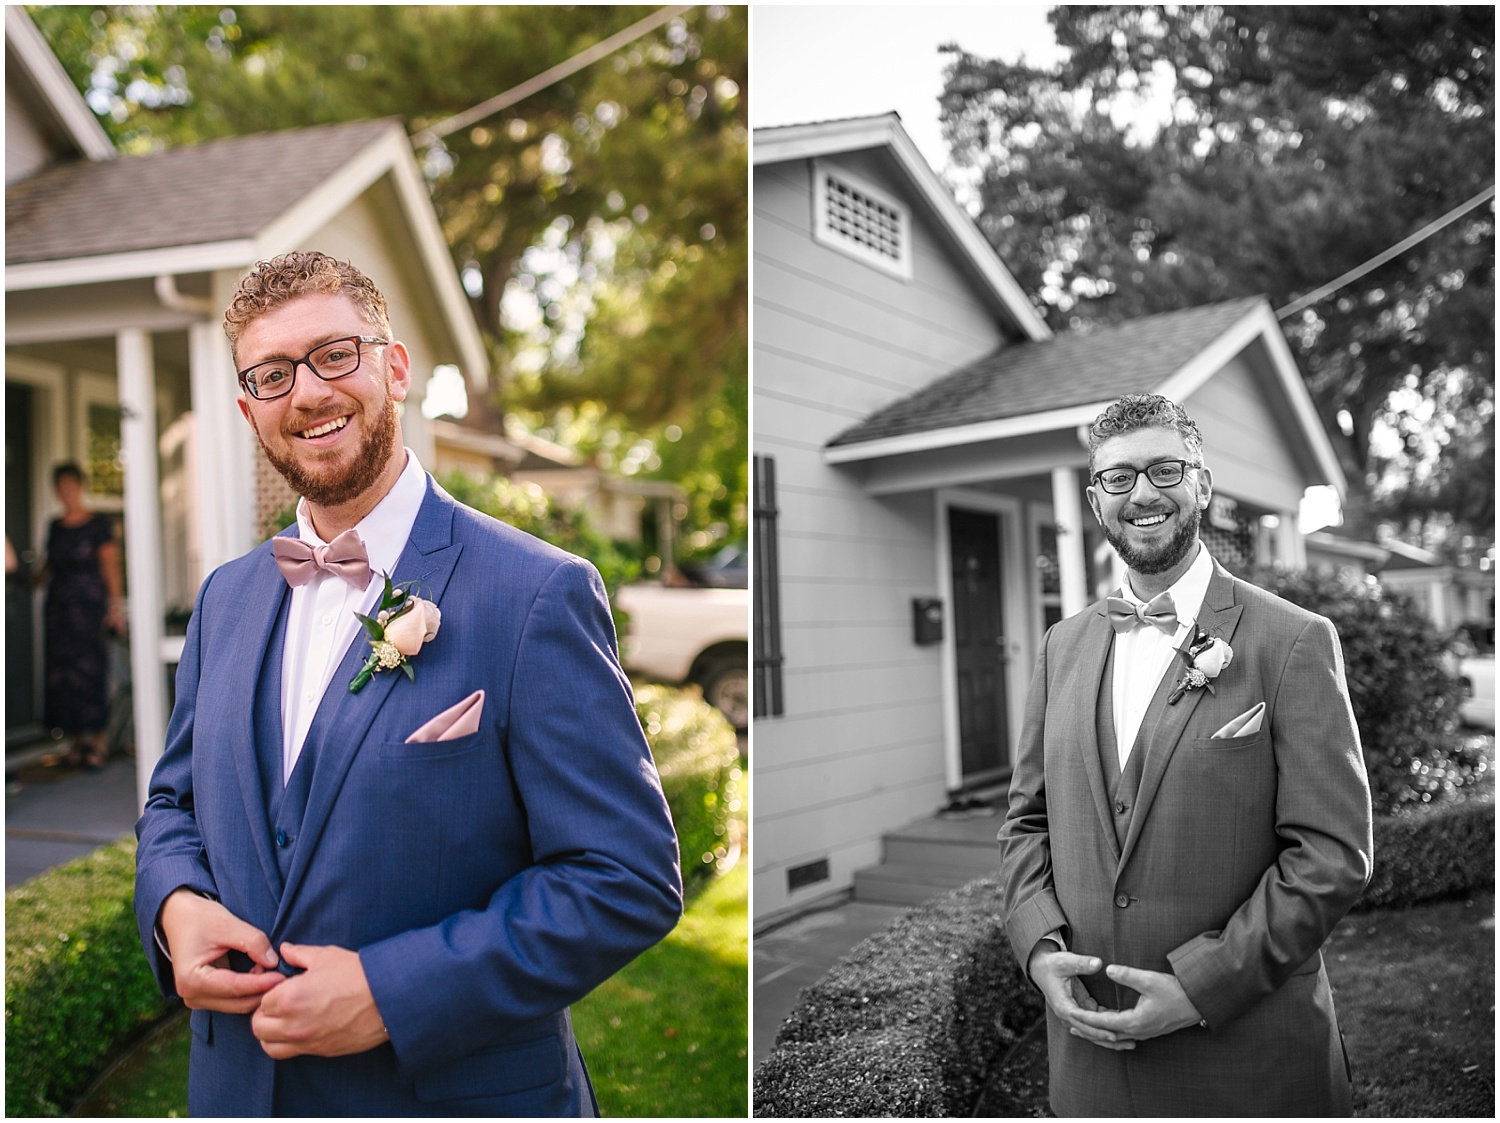 Formal portraits of the groom in navy suit